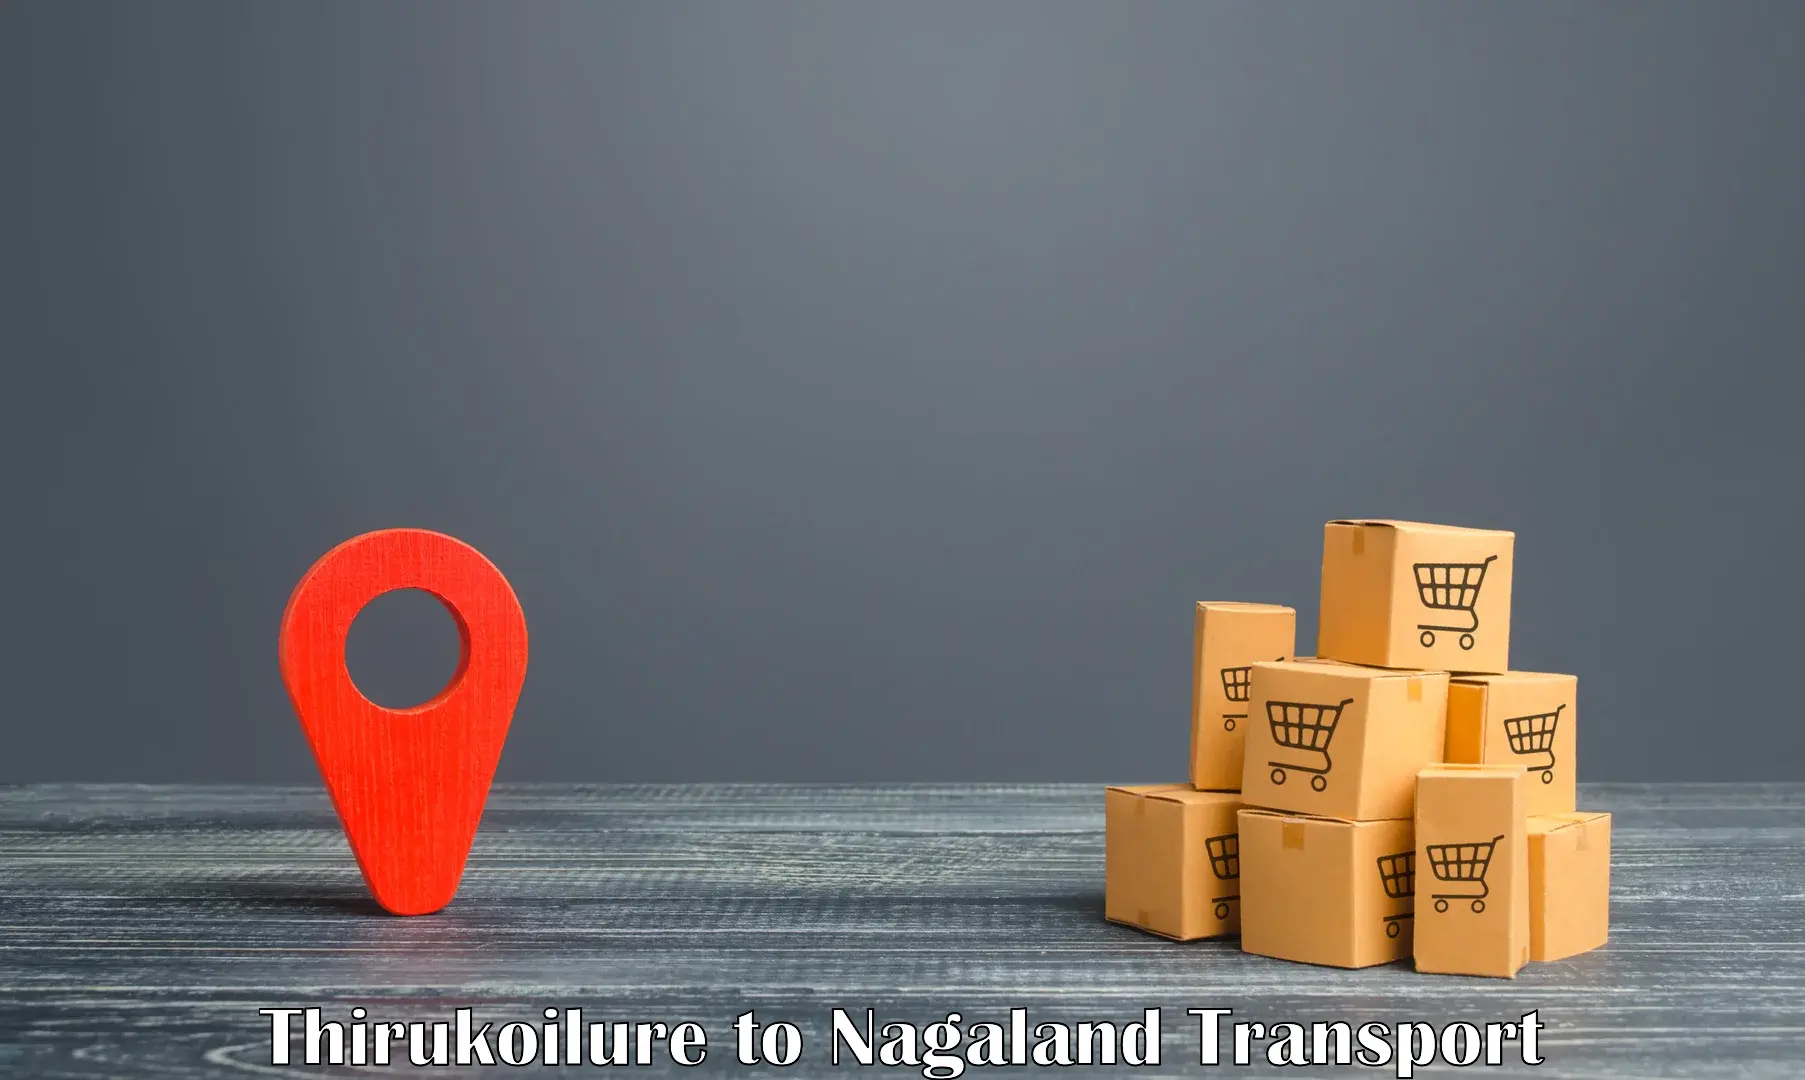 Two wheeler parcel service Thirukoilure to Nagaland